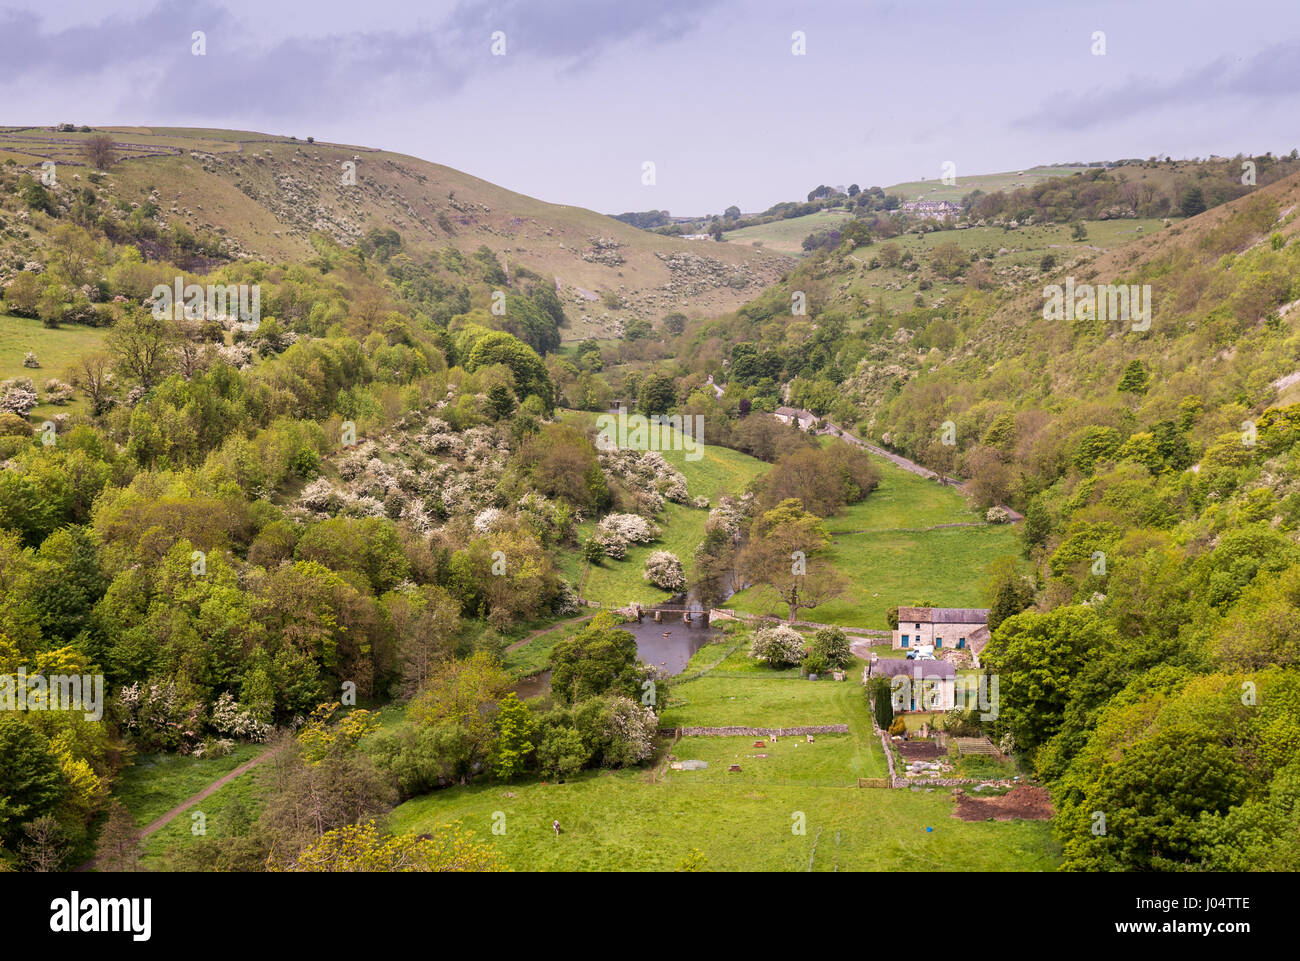 Fields and woodland in Monsal Dale valey in England's Peak District National Park. Stock Photo